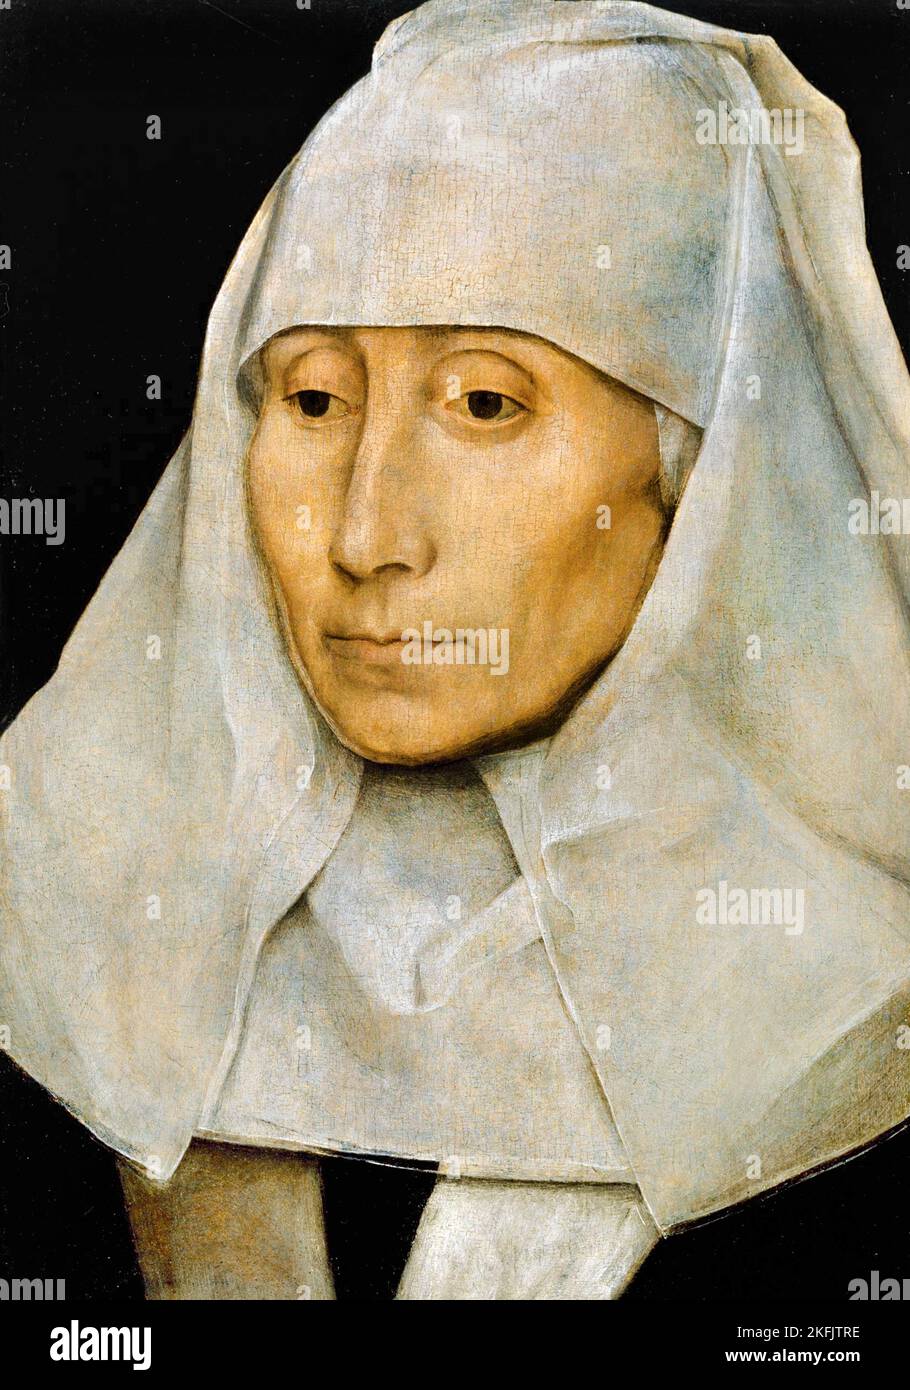 Hans Memling; Portrait of an Old Woman; Circa 1468-1470; Oil on panel; Museum of Fine Arts, Houston, USA. Stock Photo